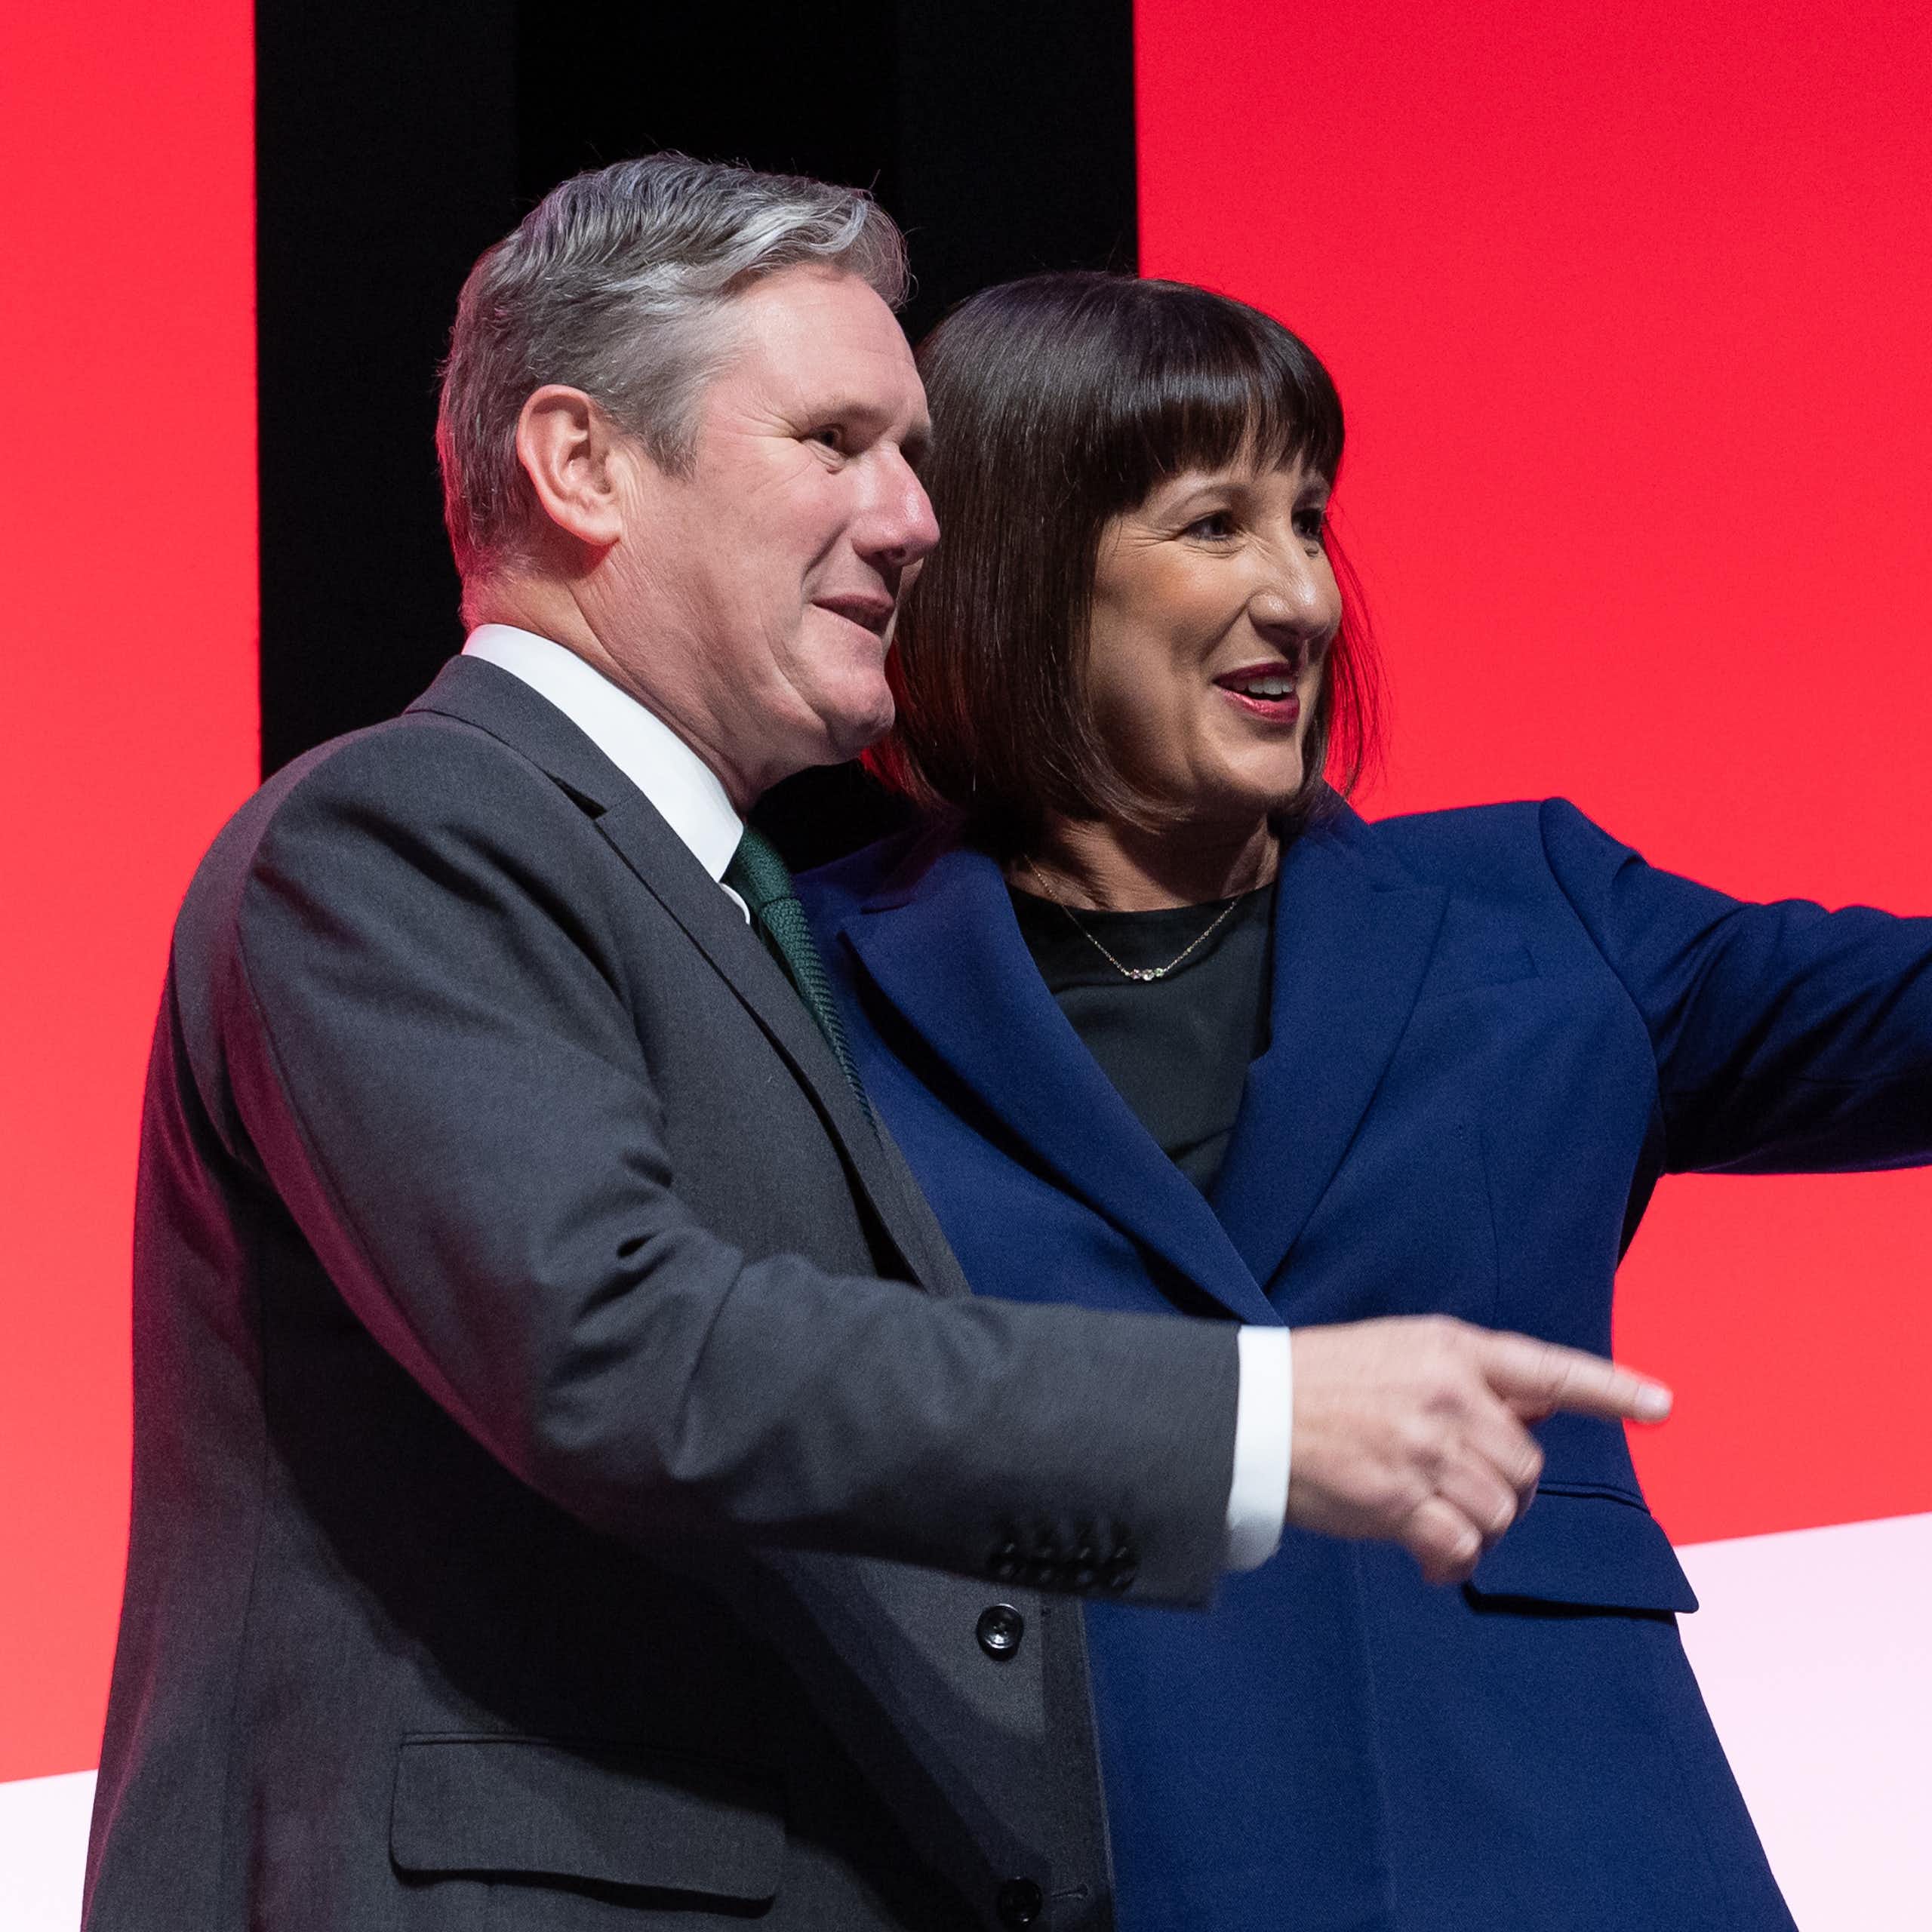 Keir Starmer and Rachel Reeves both pointing and smiling at something off camera